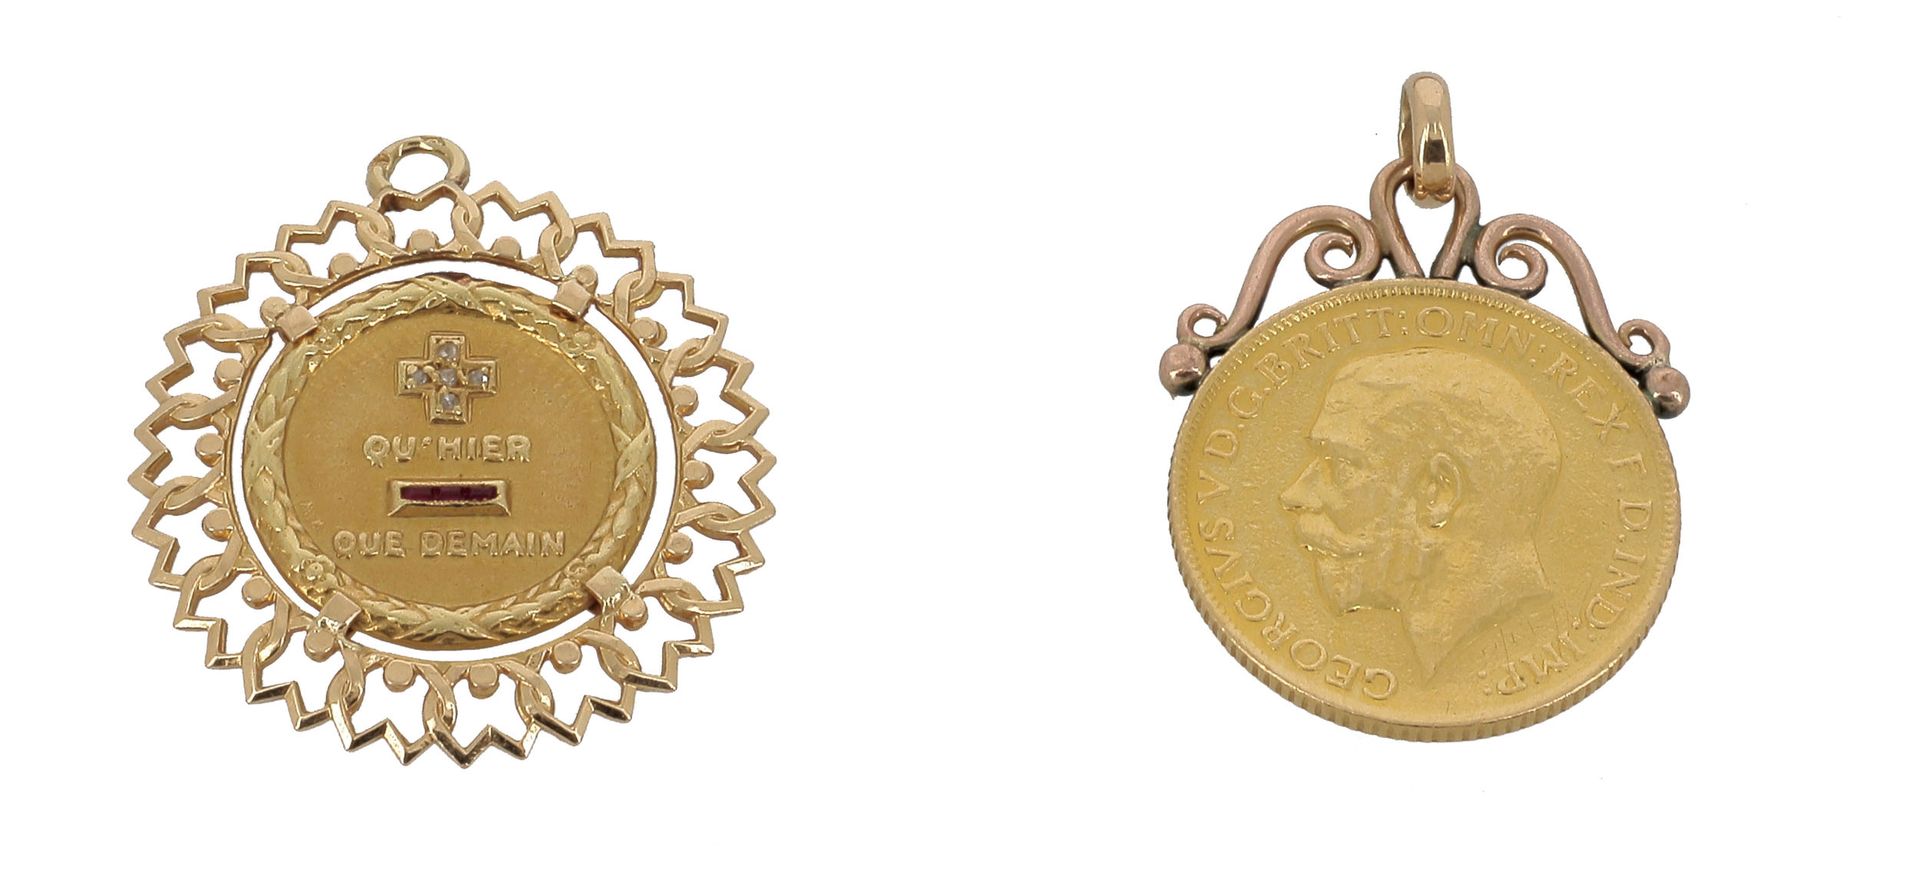 Null SET OF TWO CHAINS

in yellow gold, accompanied by a medal and a coin. 

Two&hellip;